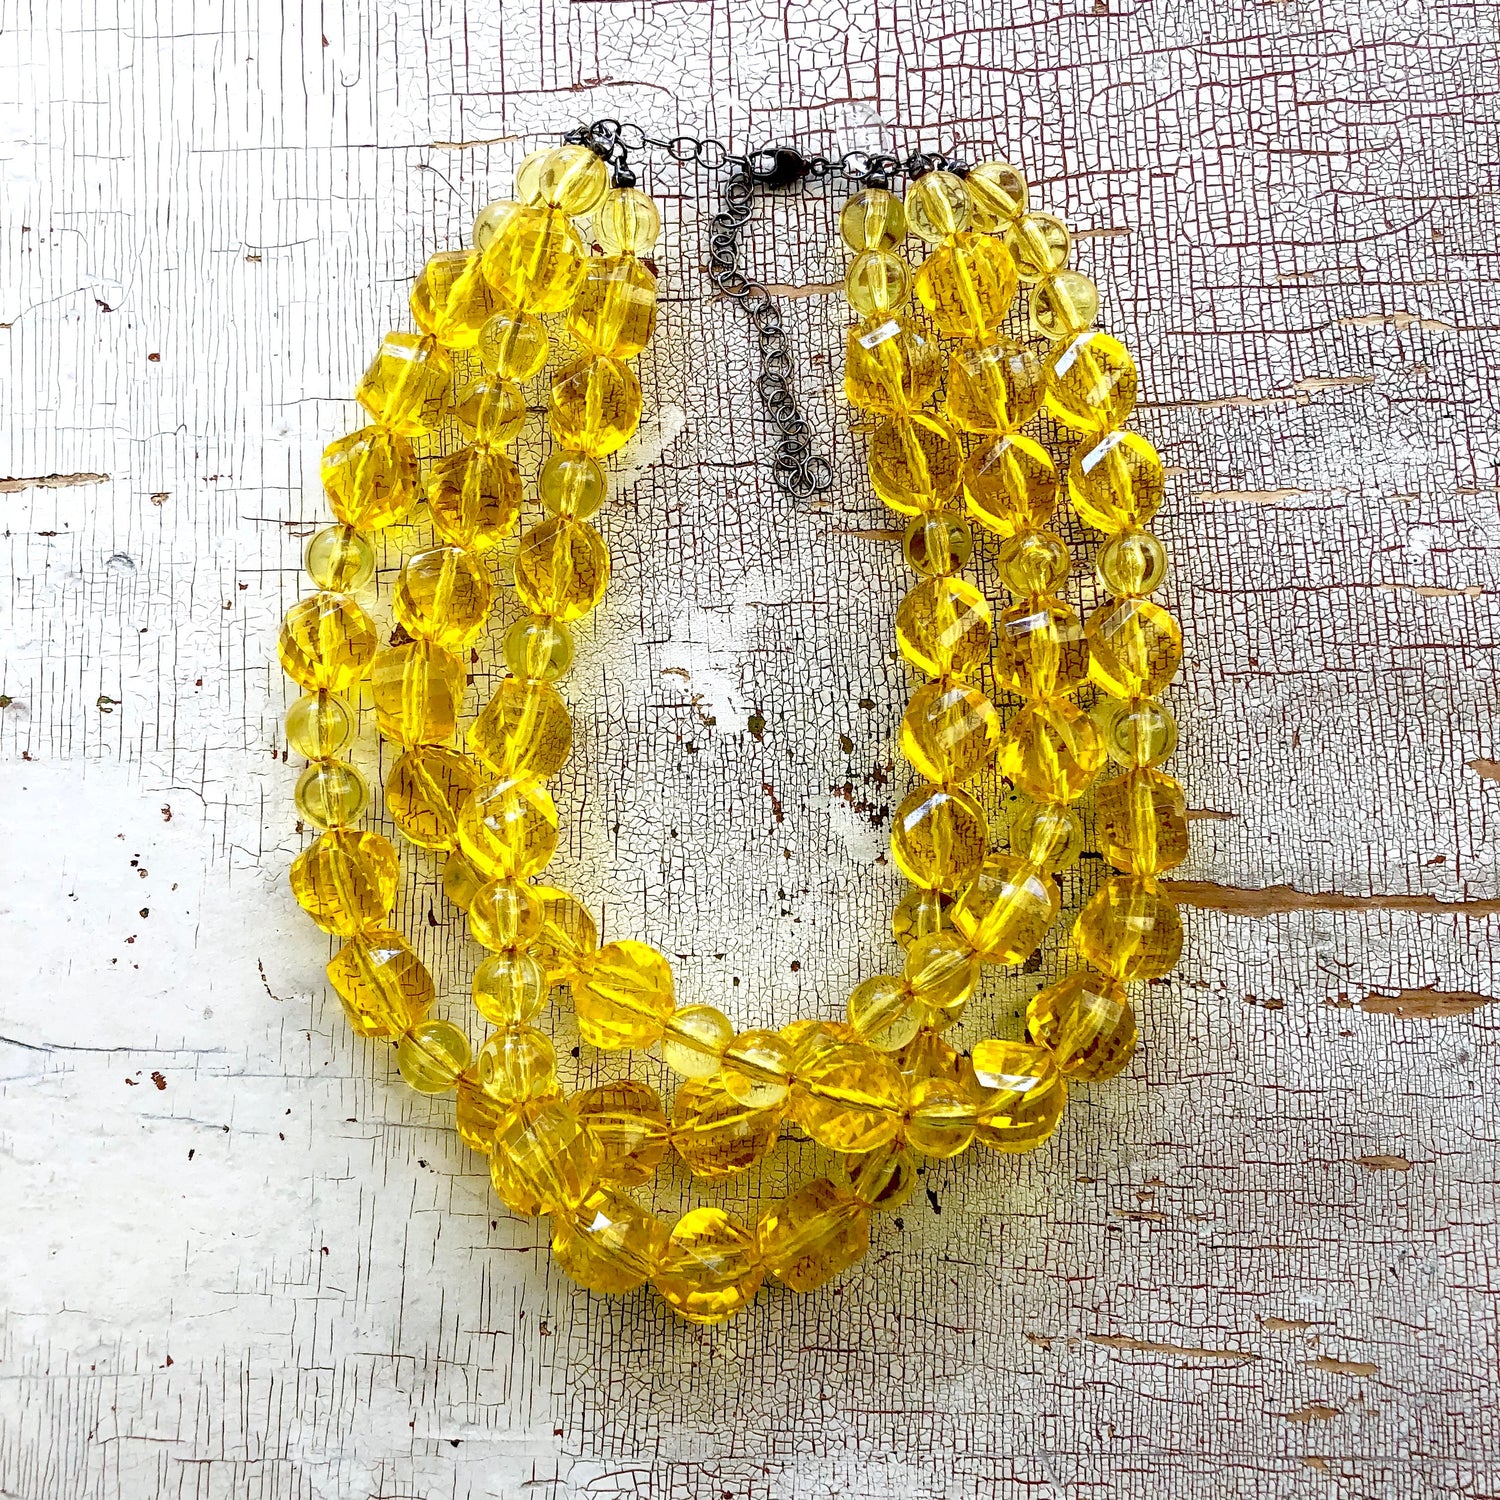 yellow beaded necklace